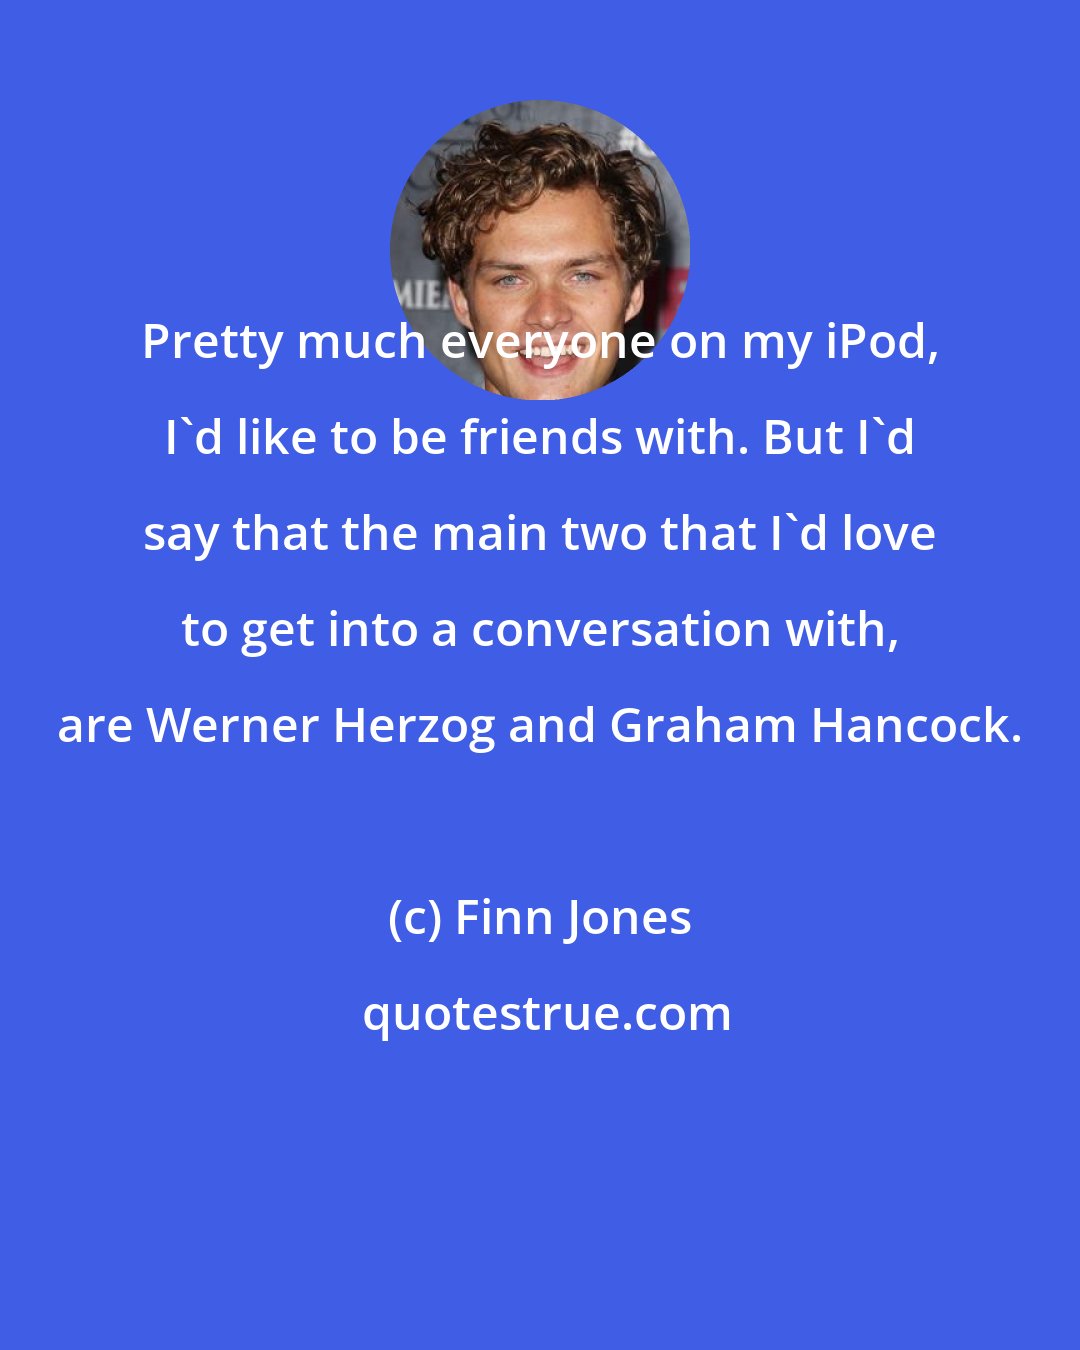 Finn Jones: Pretty much everyone on my iPod, I'd like to be friends with. But I'd say that the main two that I'd love to get into a conversation with, are Werner Herzog and Graham Hancock.